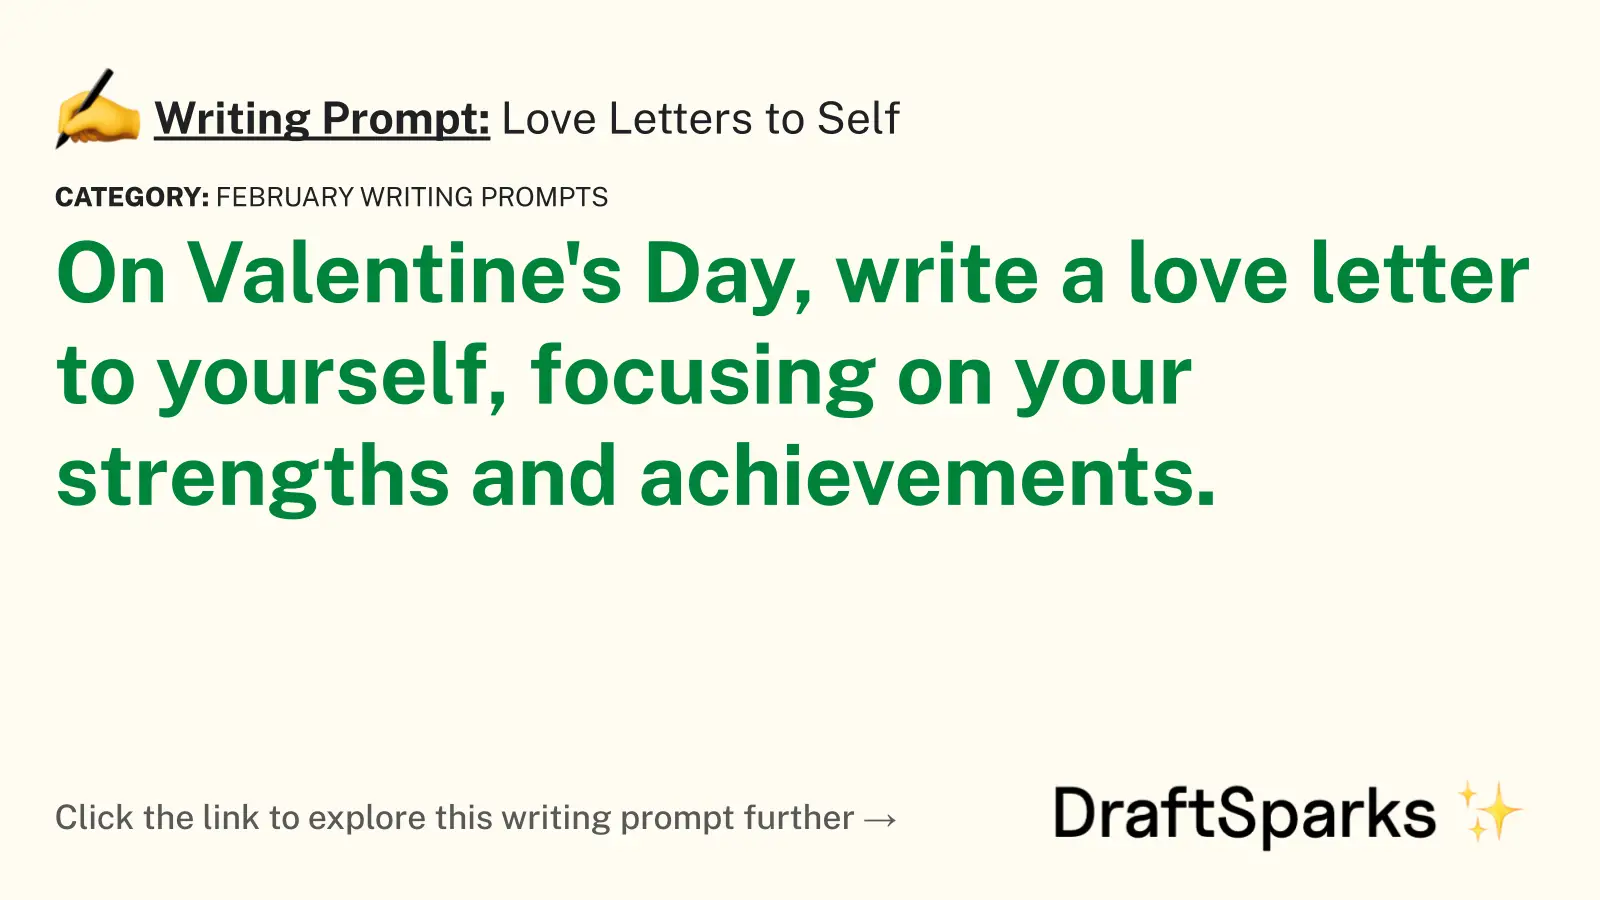 Love Letters to Self